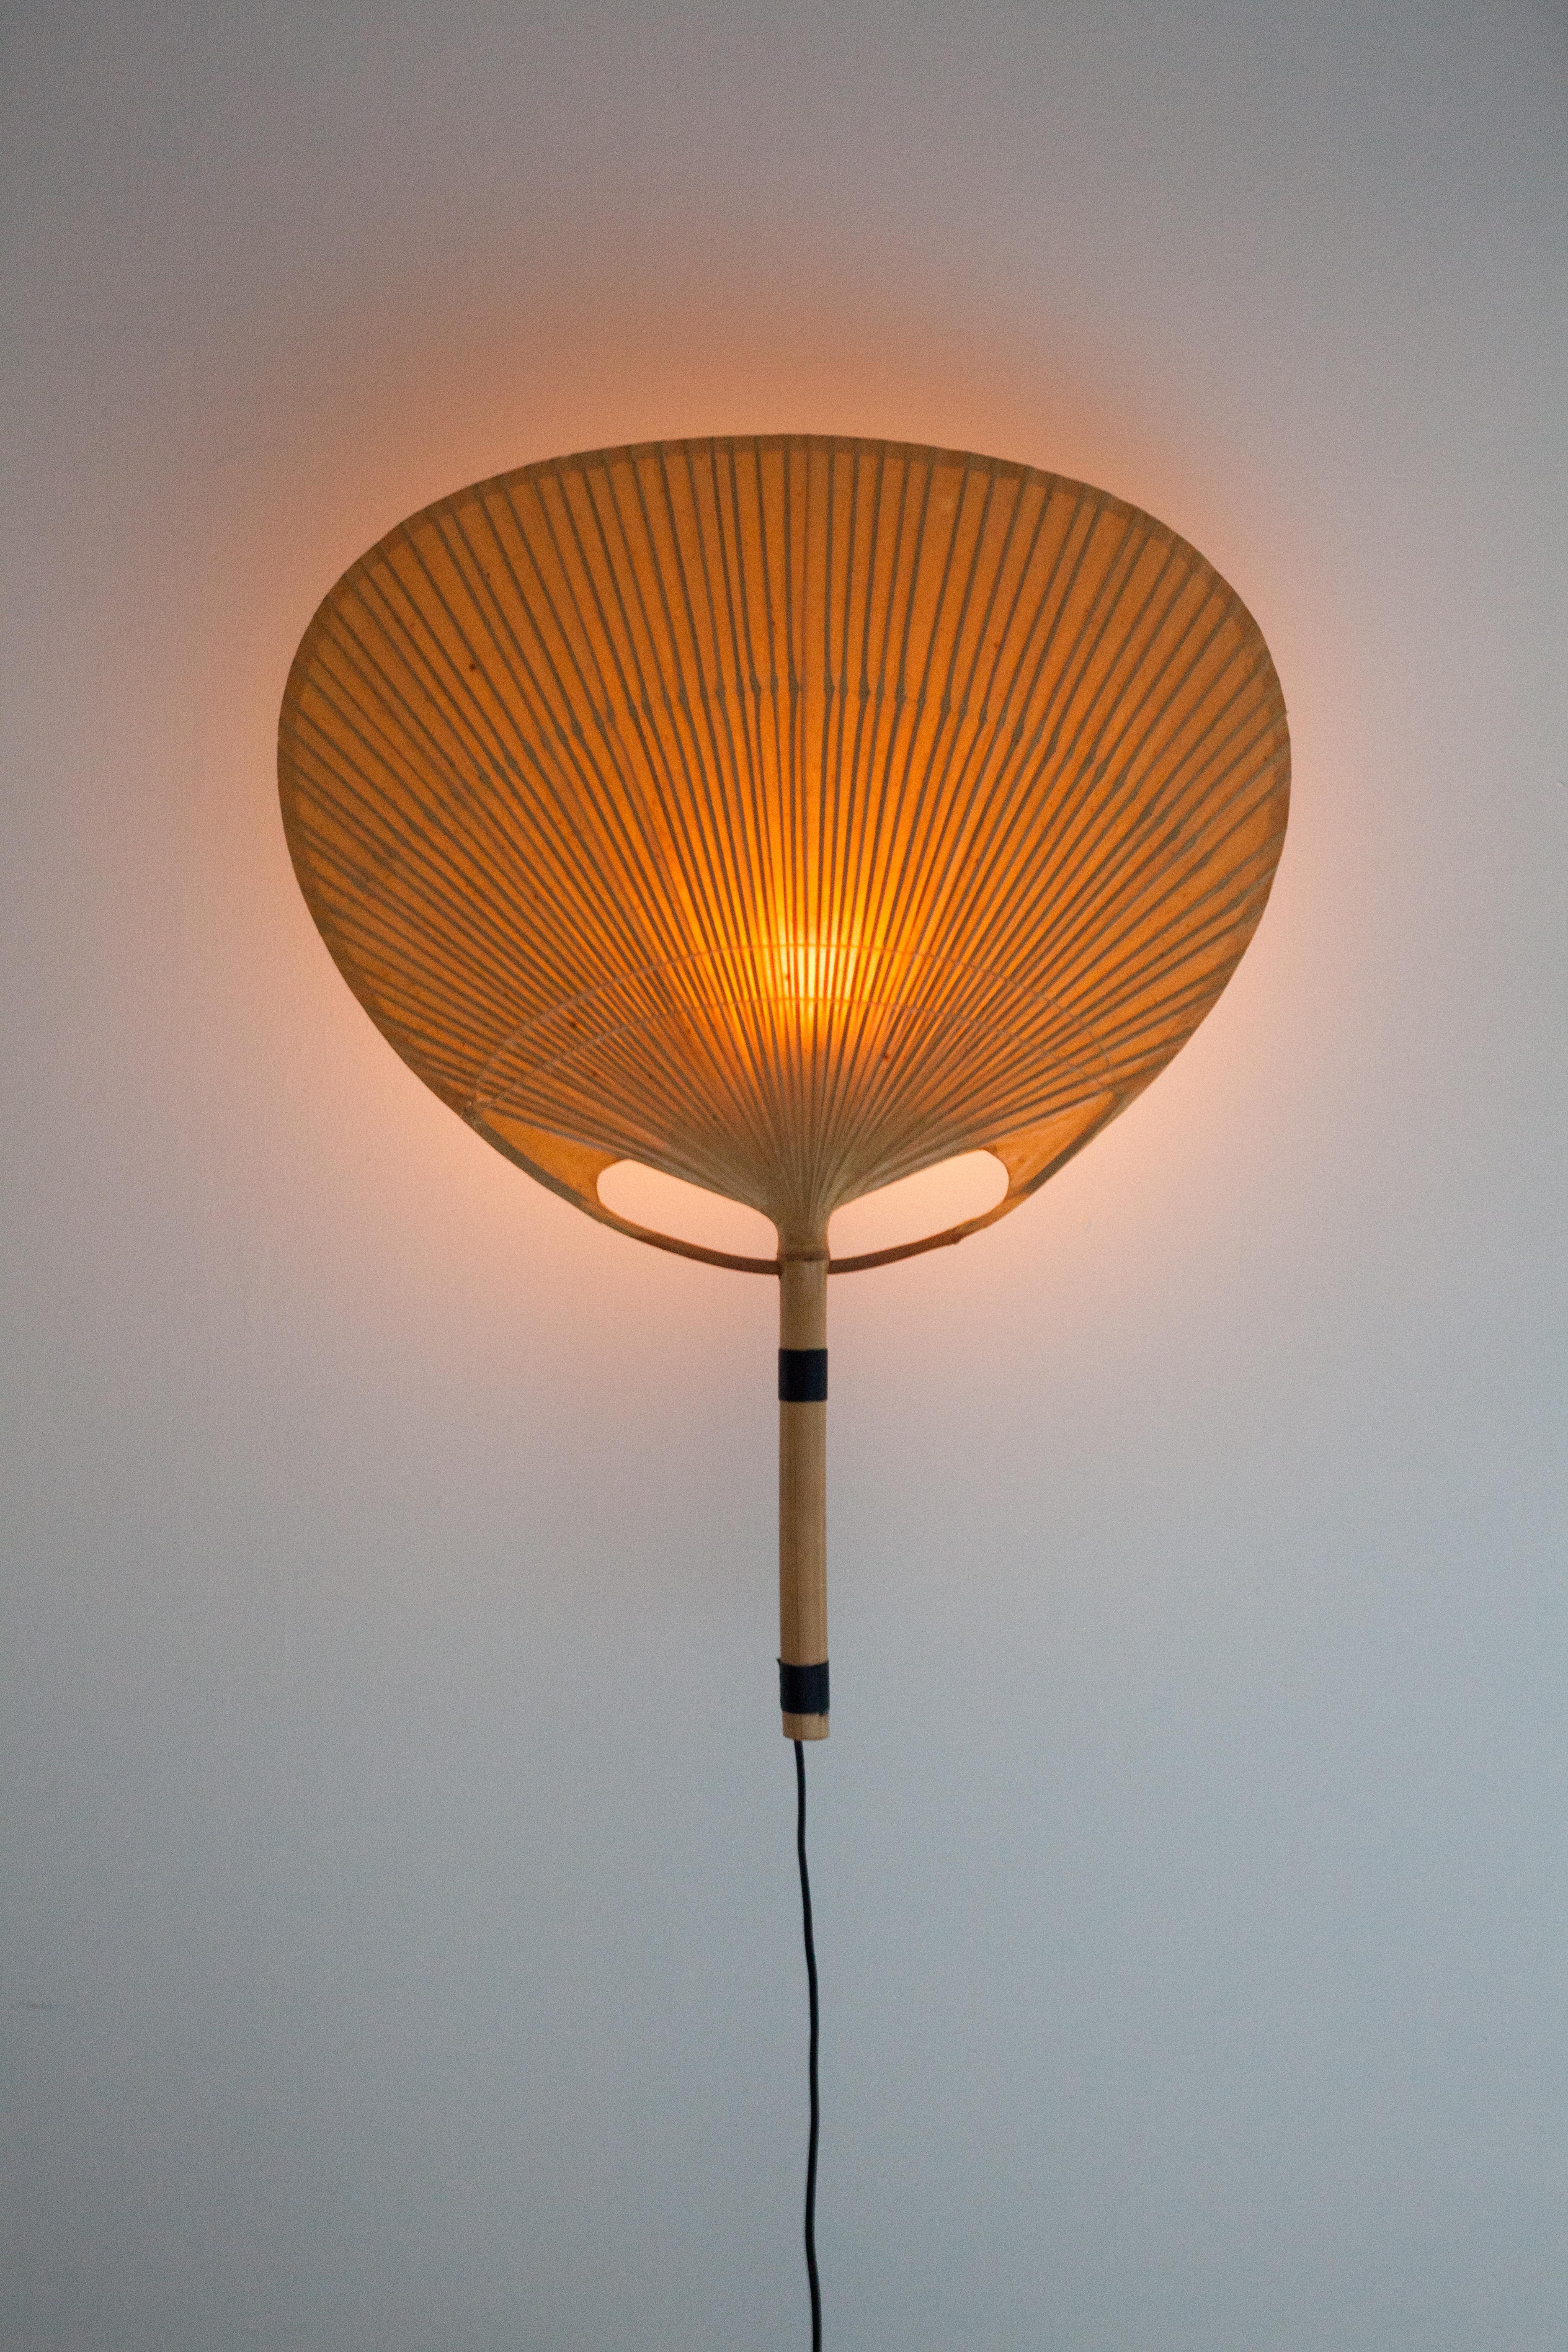 Iconic bamboo fan sconce by Ingo Maurer, Germany, 1079s. 

The Uchiwa fans are traditional Japanese hand fans and Maurer applied the same paper and bamboo techniques to create his wall sconces.